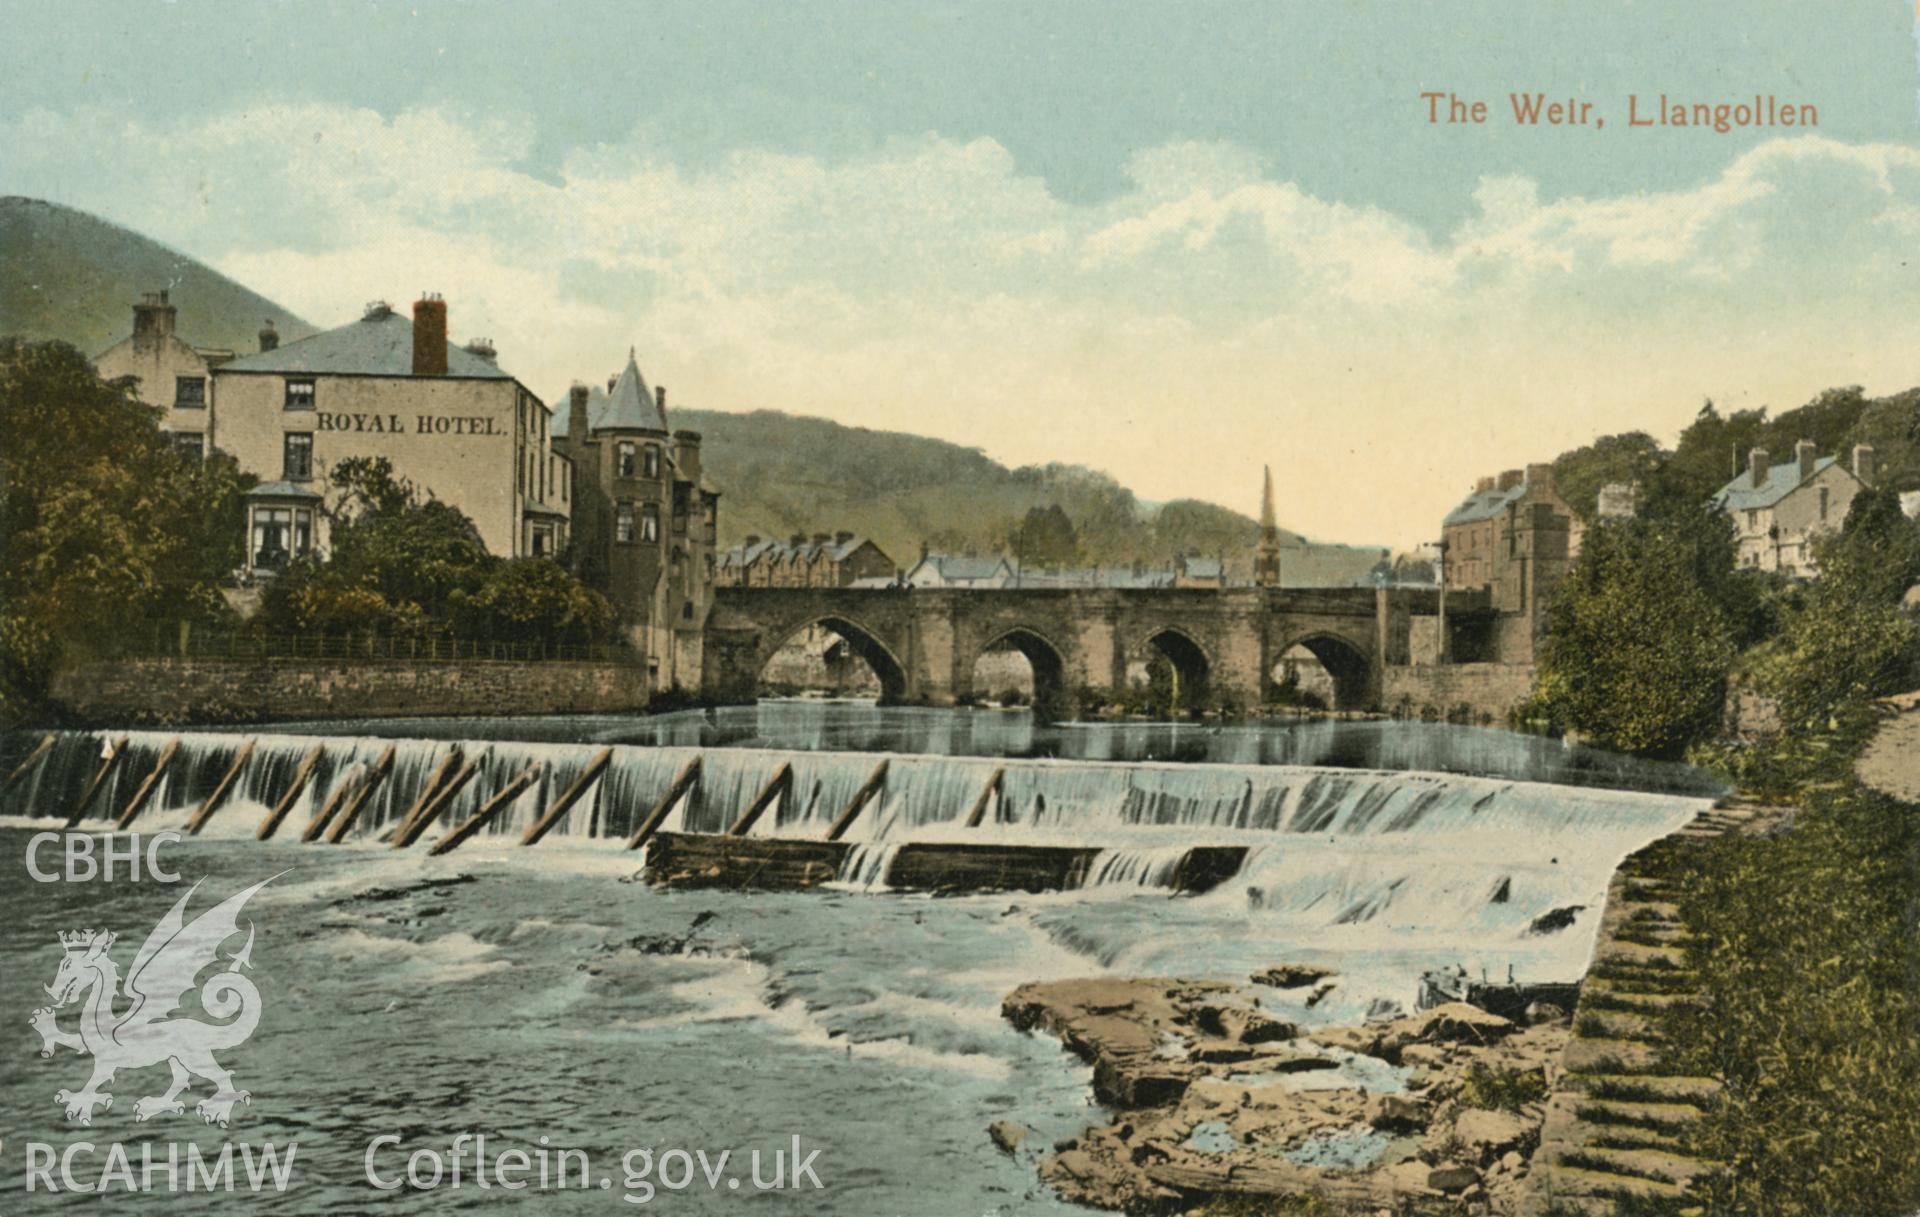 Digital copy of an undated postcard from the Dave Davies Collection showing a view of bridge and weir, Llangollen.